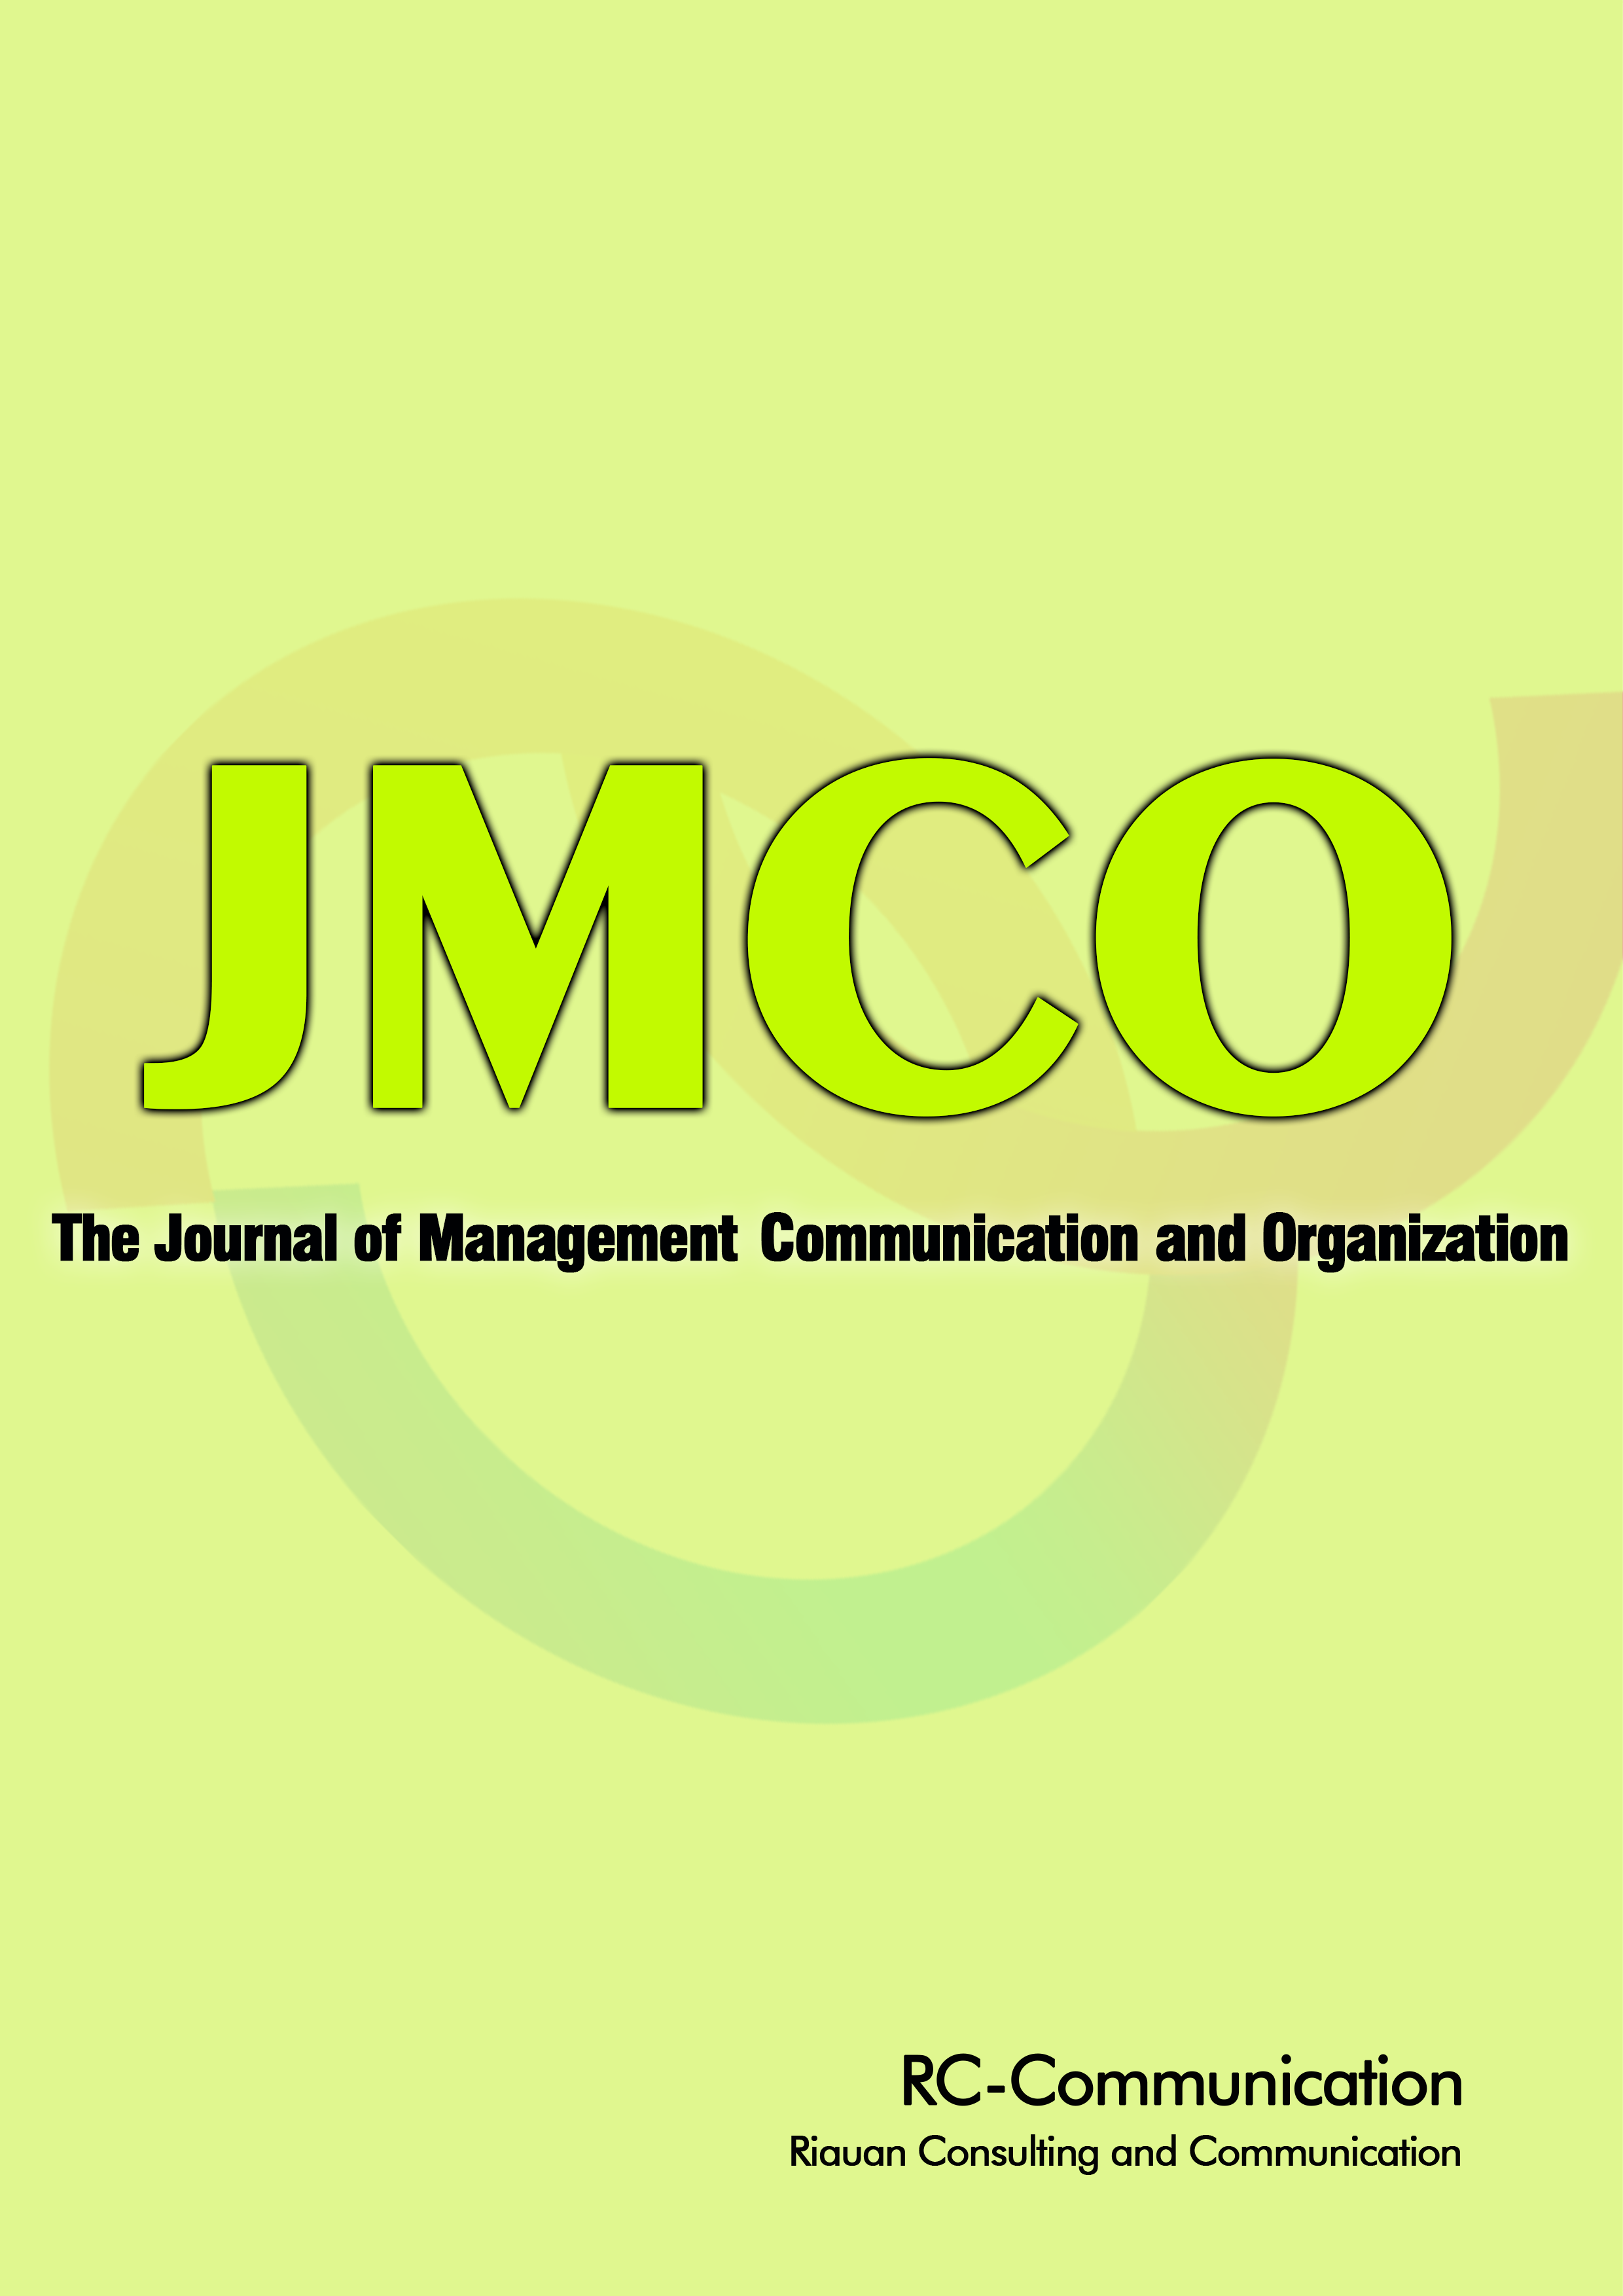 The Journal of Management Communication and Organization